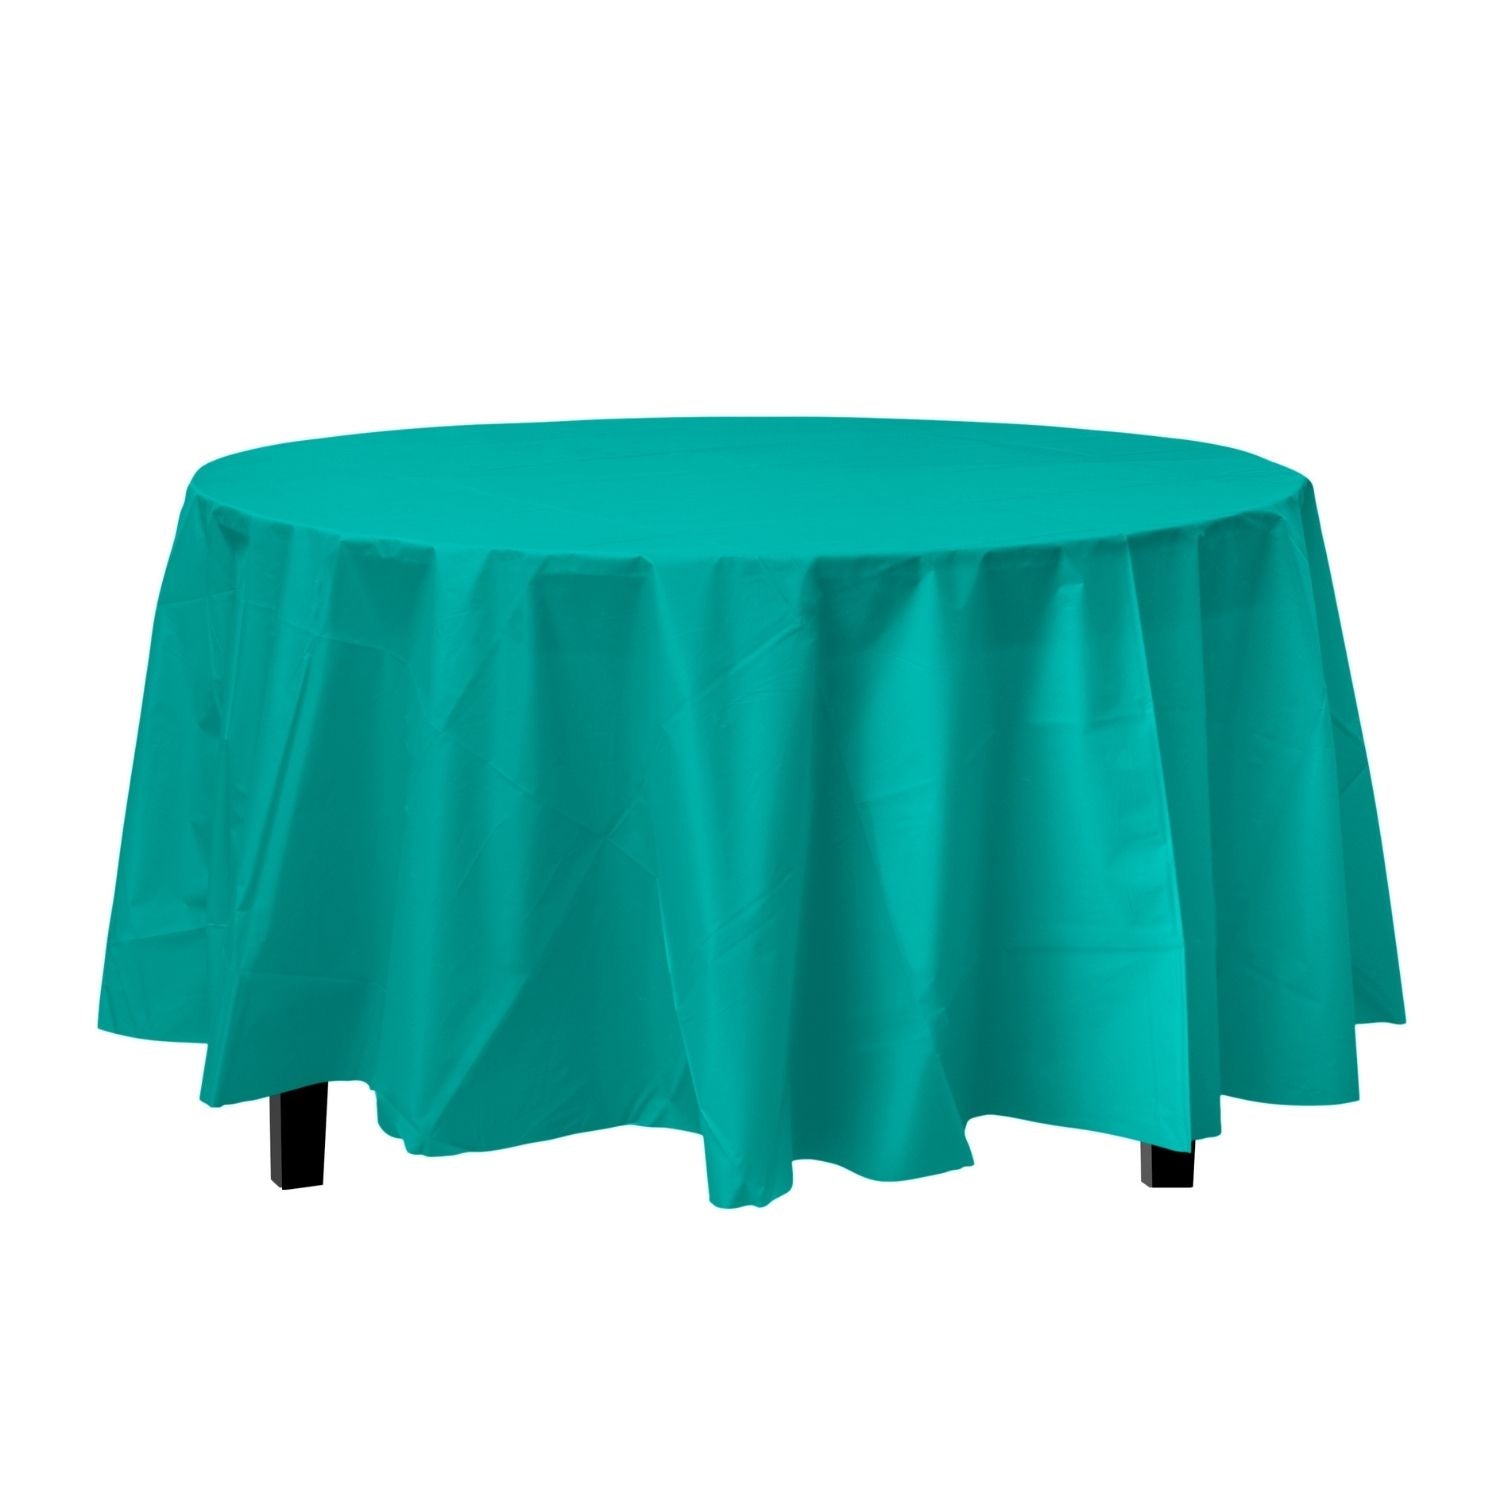 Teal Round Plastic Tablecloth | 48 Count - Yom Tov Settings